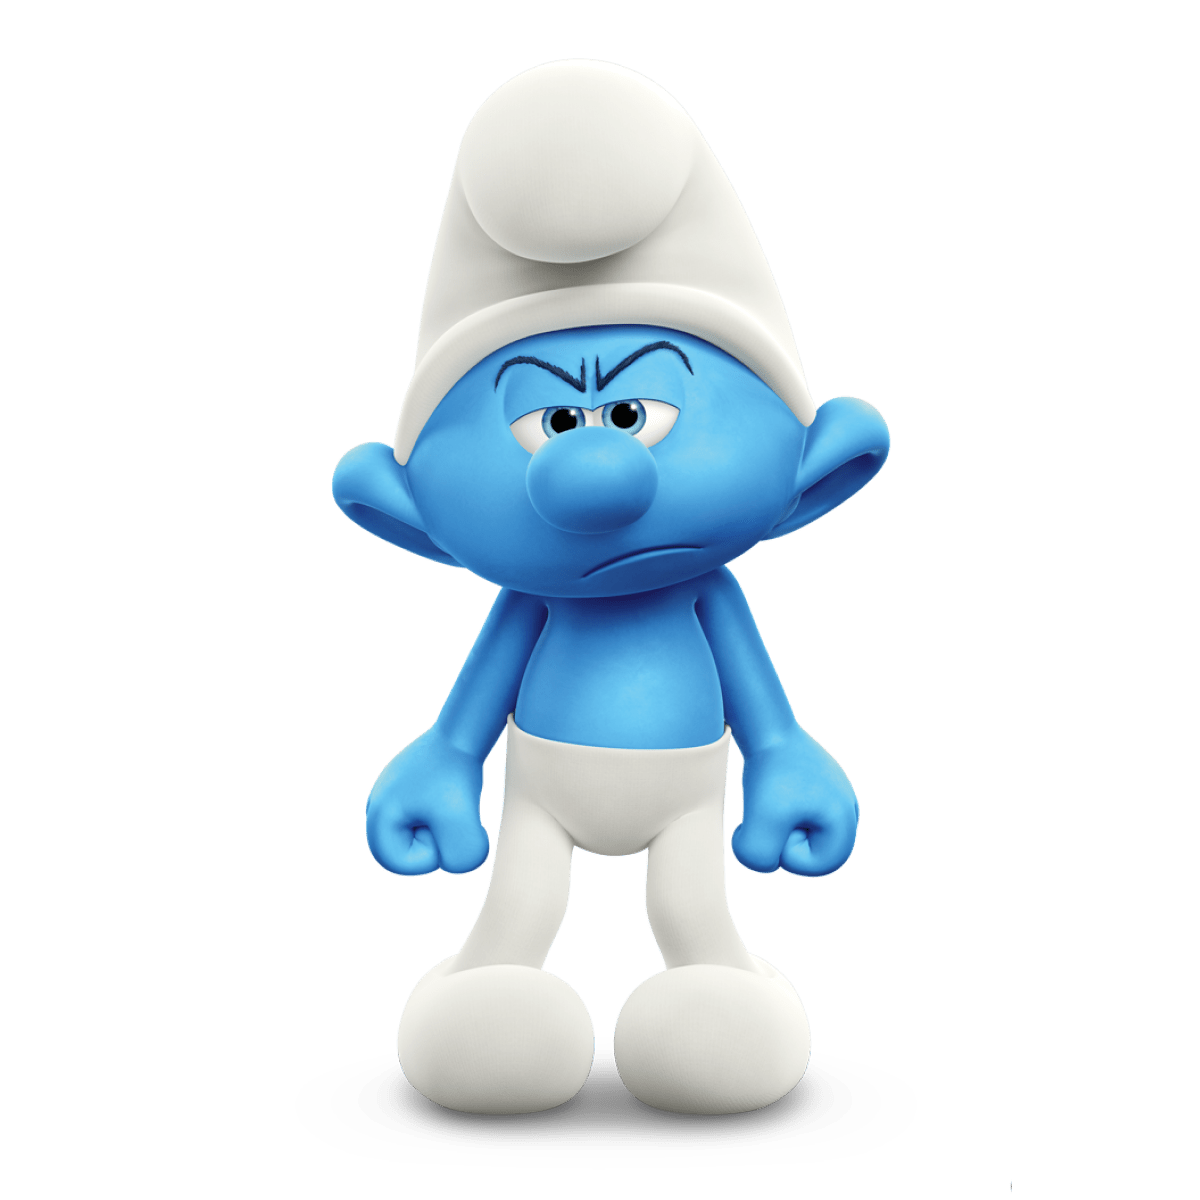 He's gonna smurf the smurf out of her - Funny